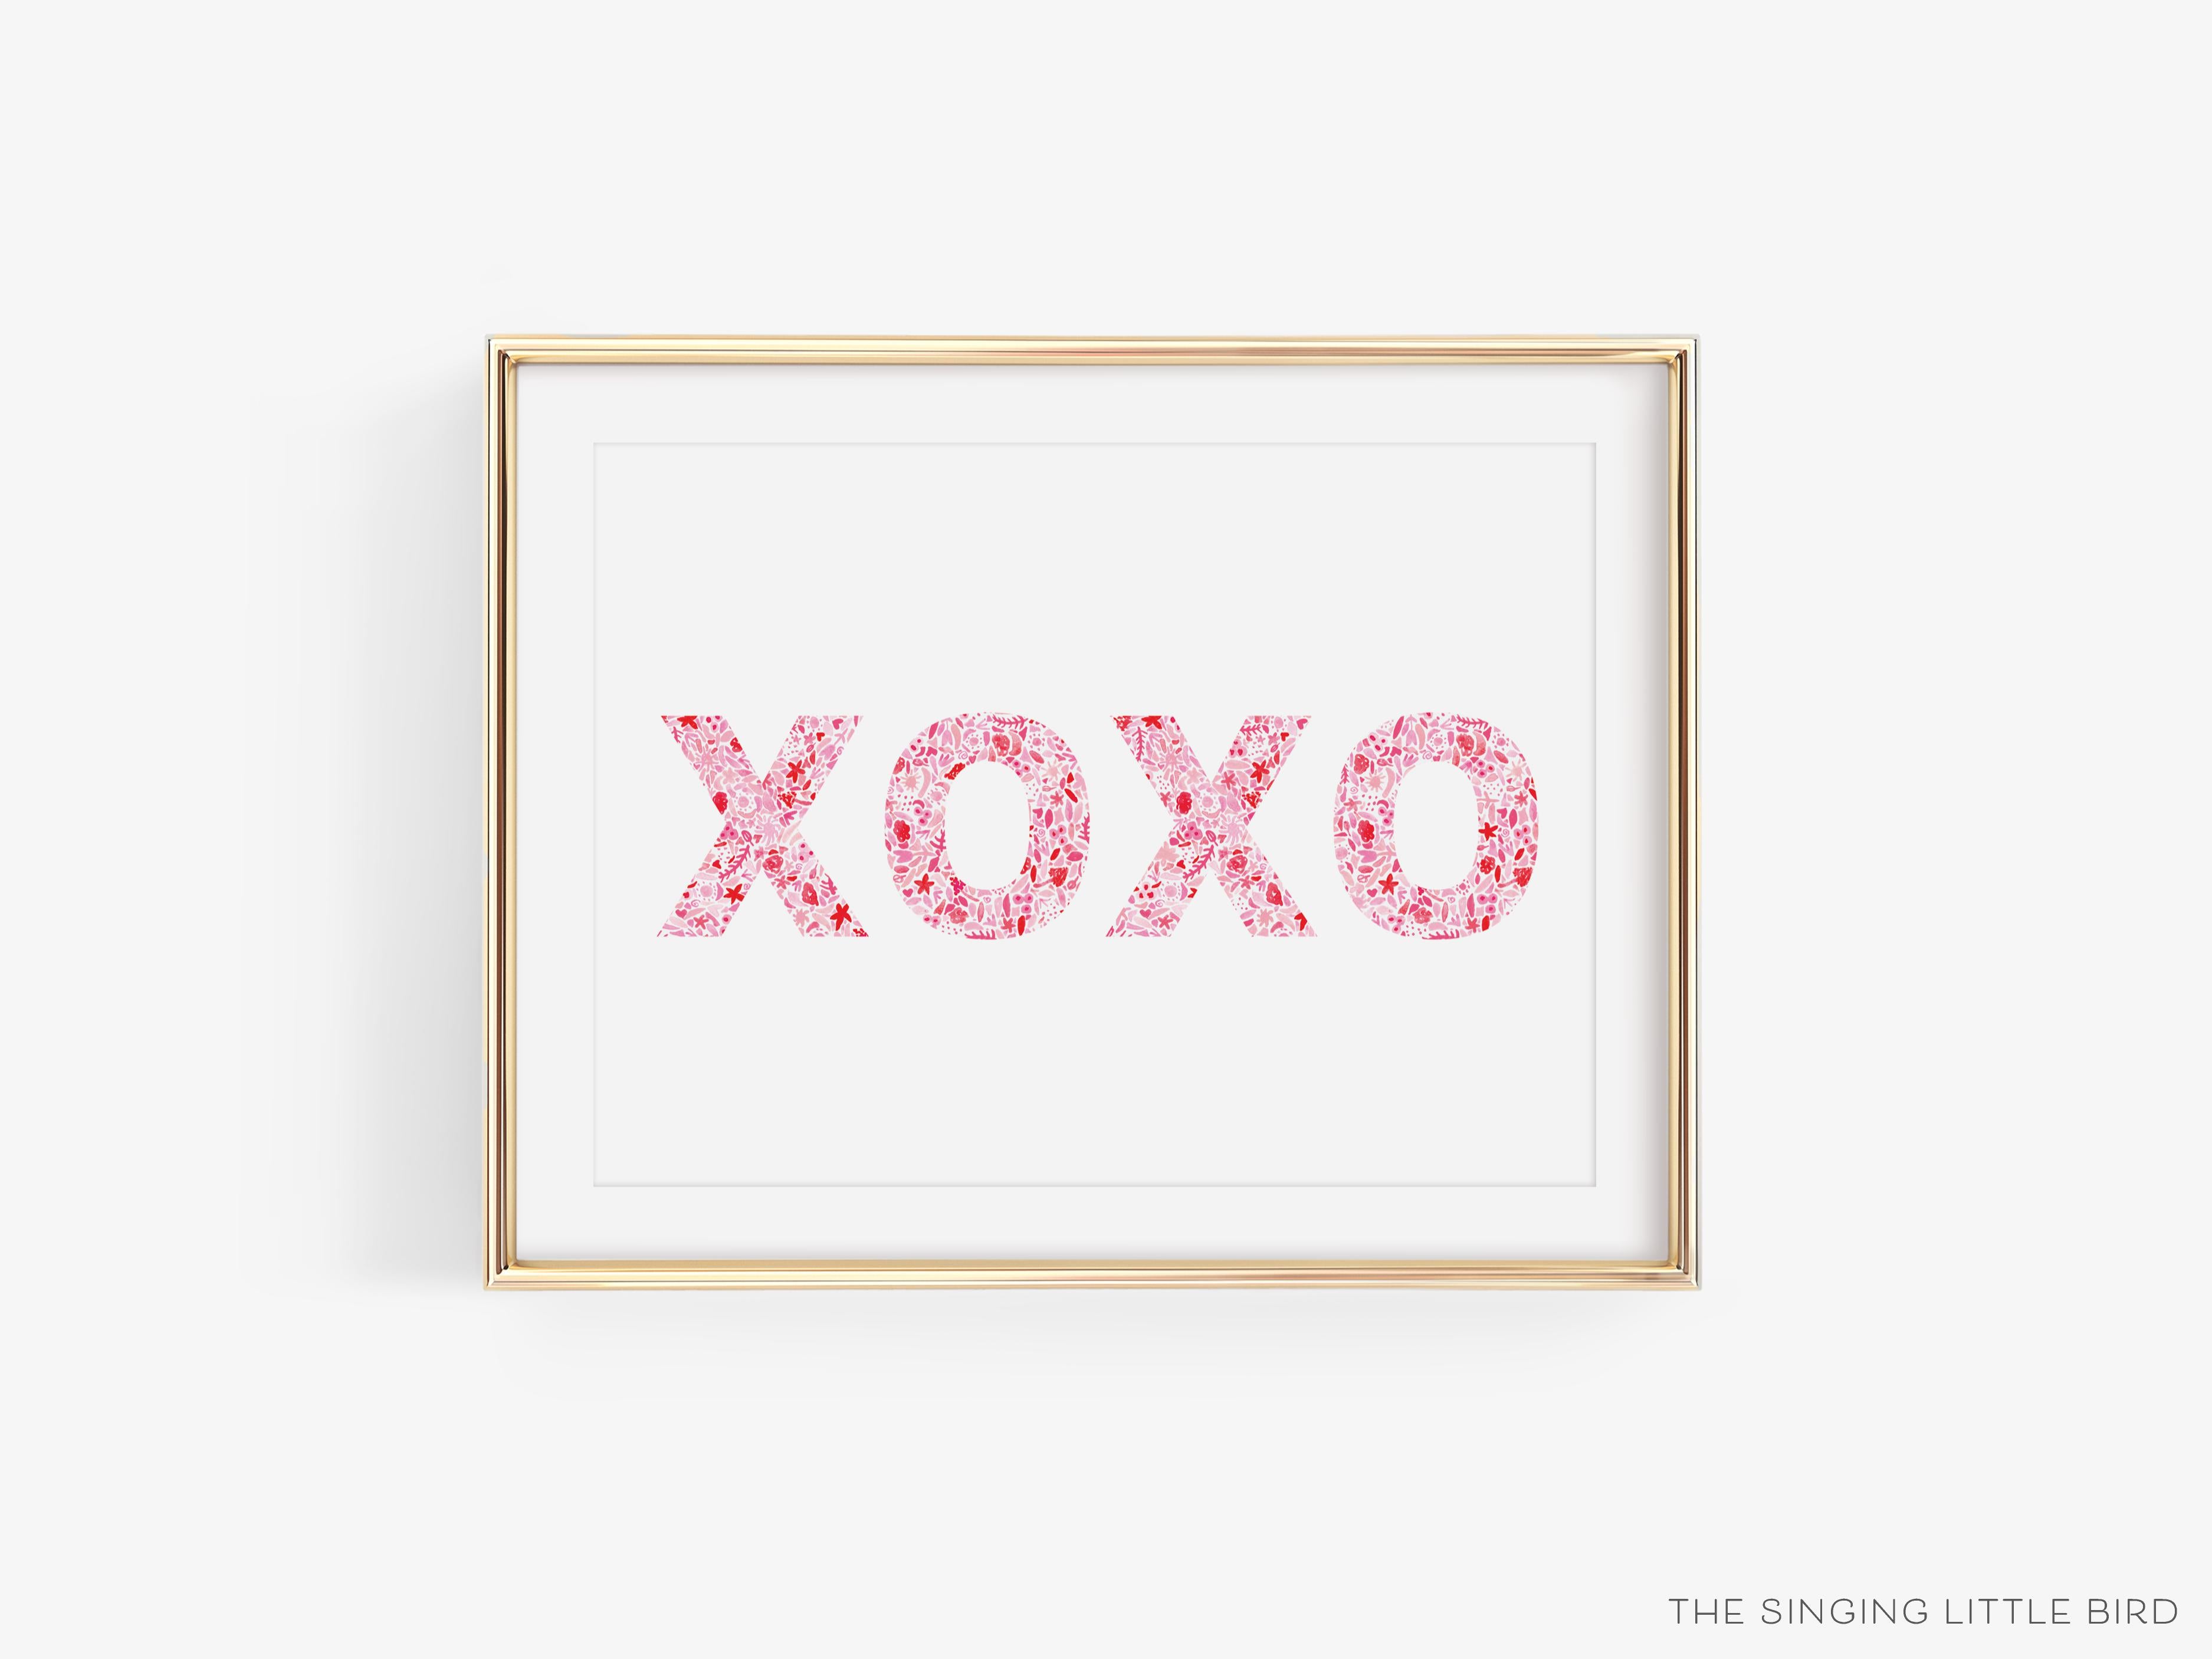 XOXO Pink and Red Art Print-This watercolor art print features our hand-painted xo's and heart, printed in the USA on 120lb high quality art paper. This makes a great gift or wall decor for the hugs and kisses lover in your life.-The Singing Little Bird